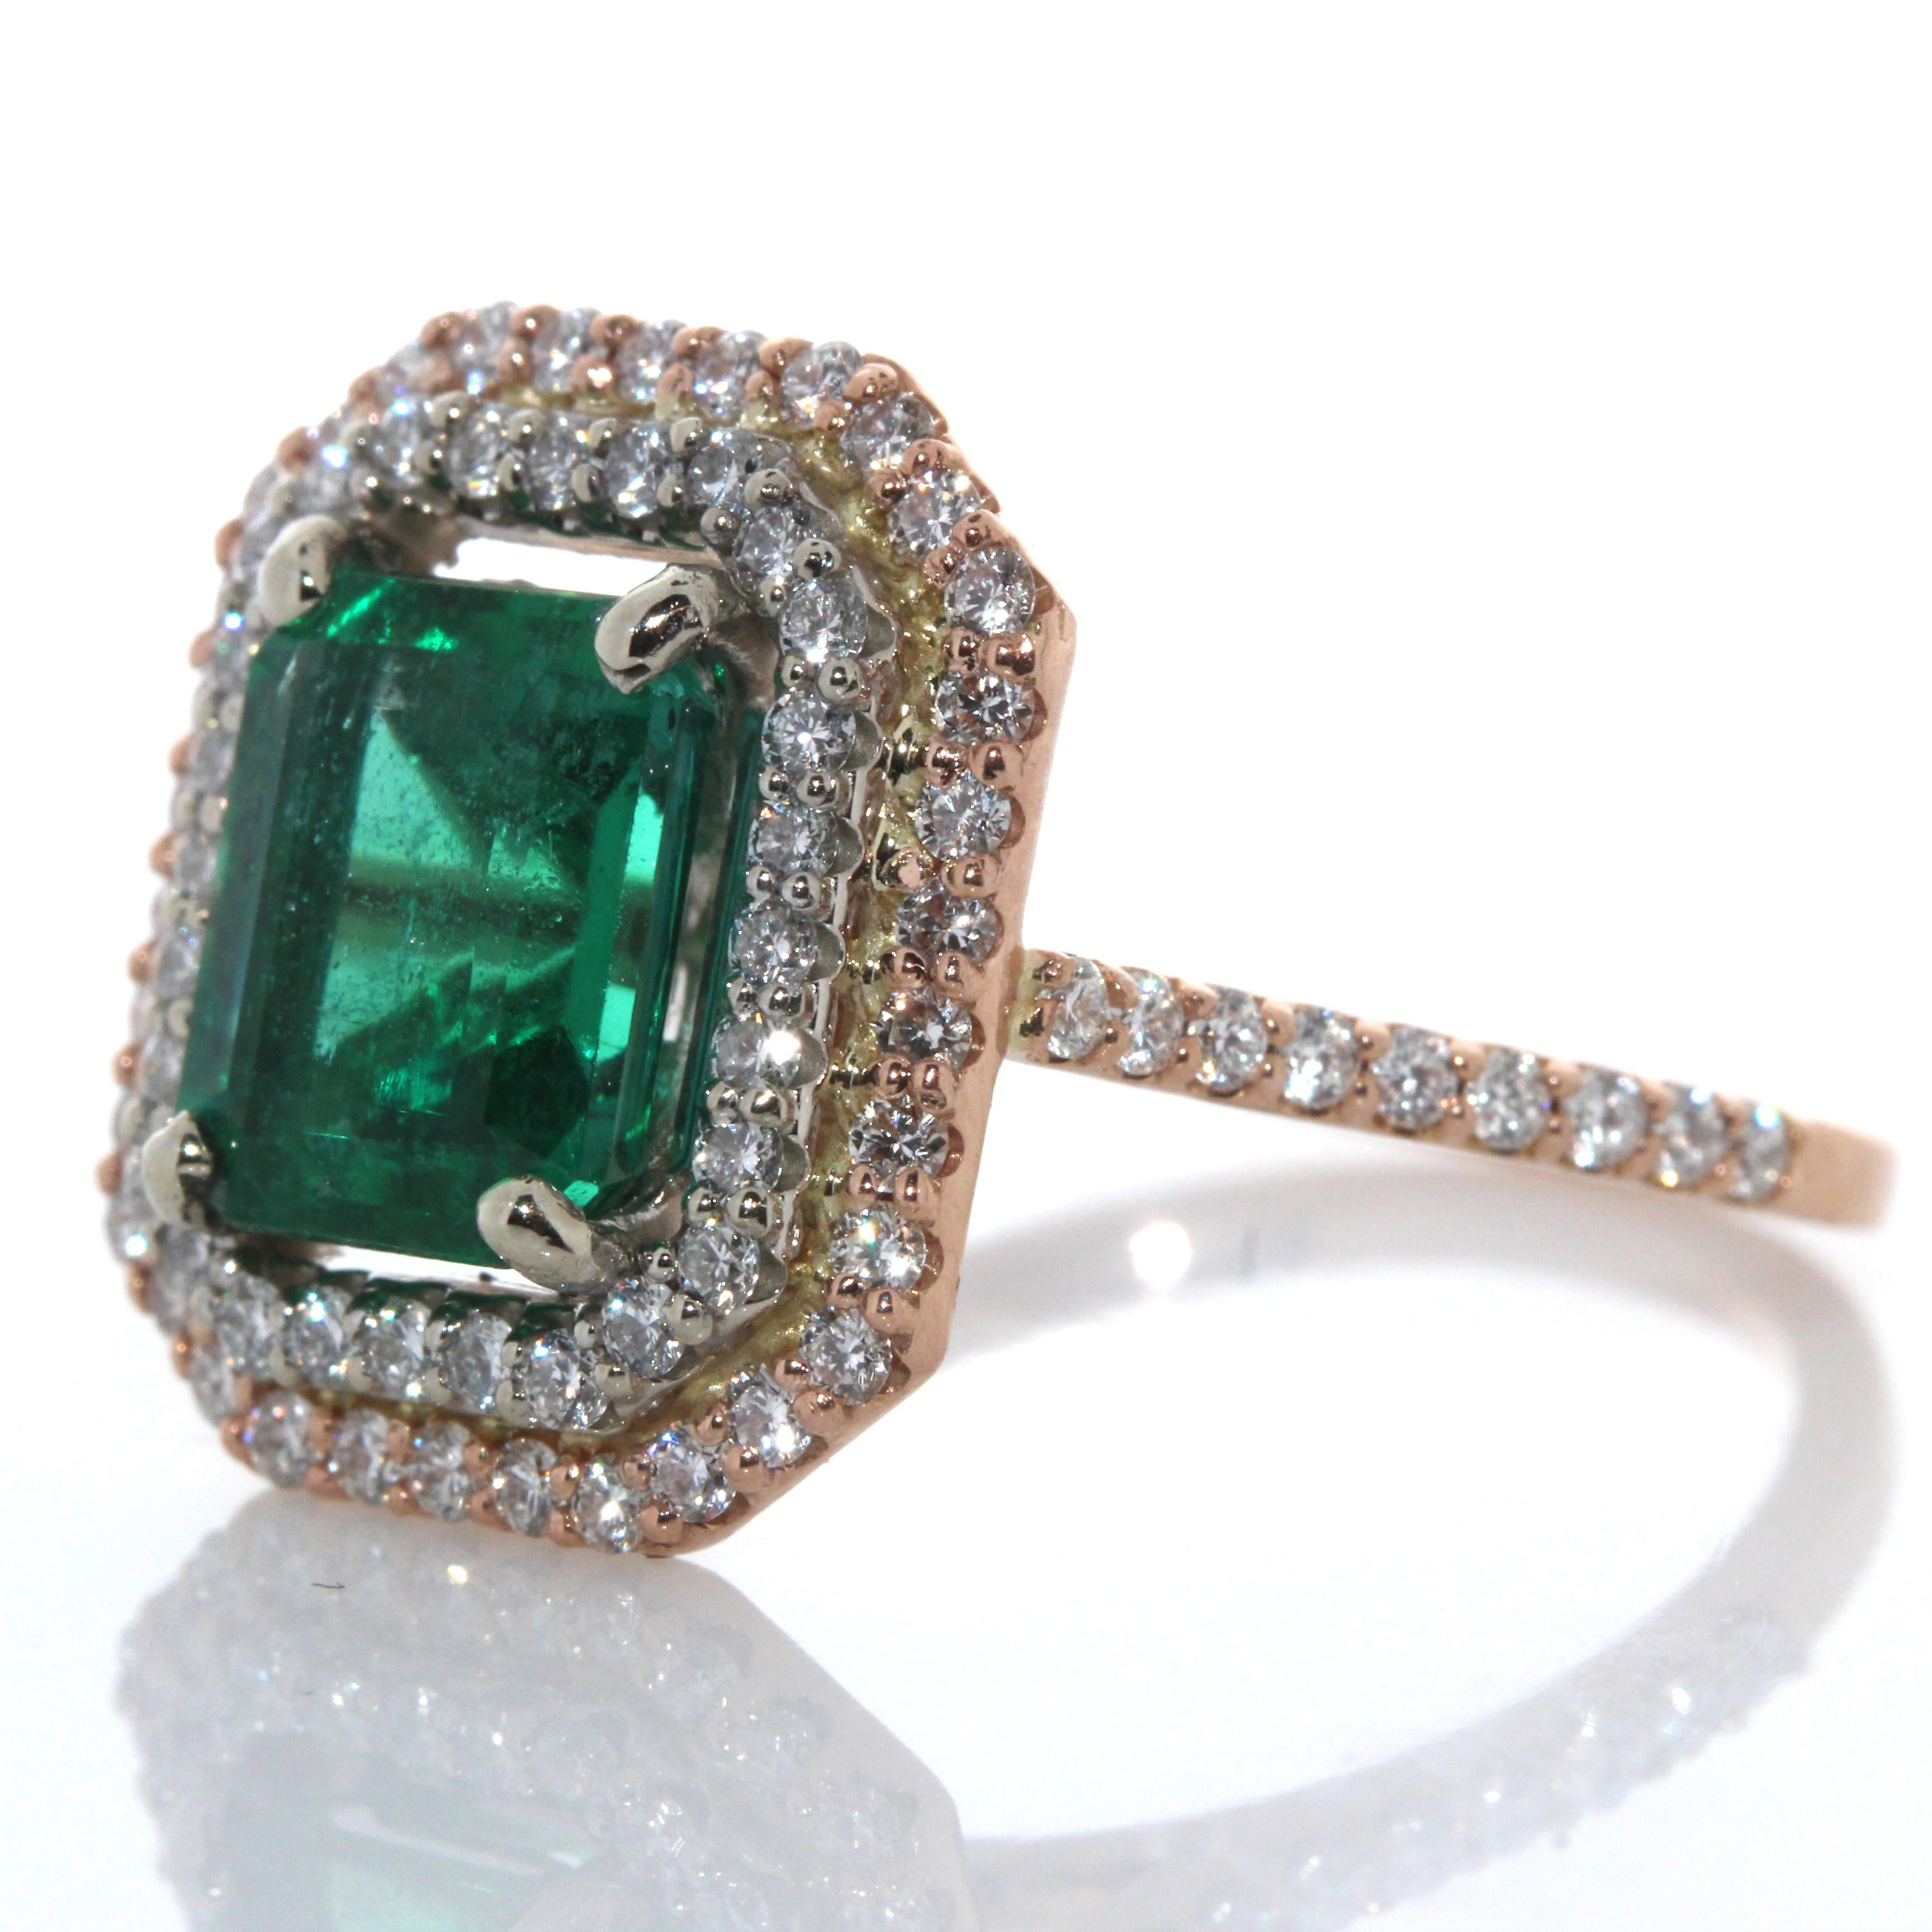 Cushion Cut 2.63 Carat Weight Emerald & Diamond Ring in 14k Rose Gold For Sale